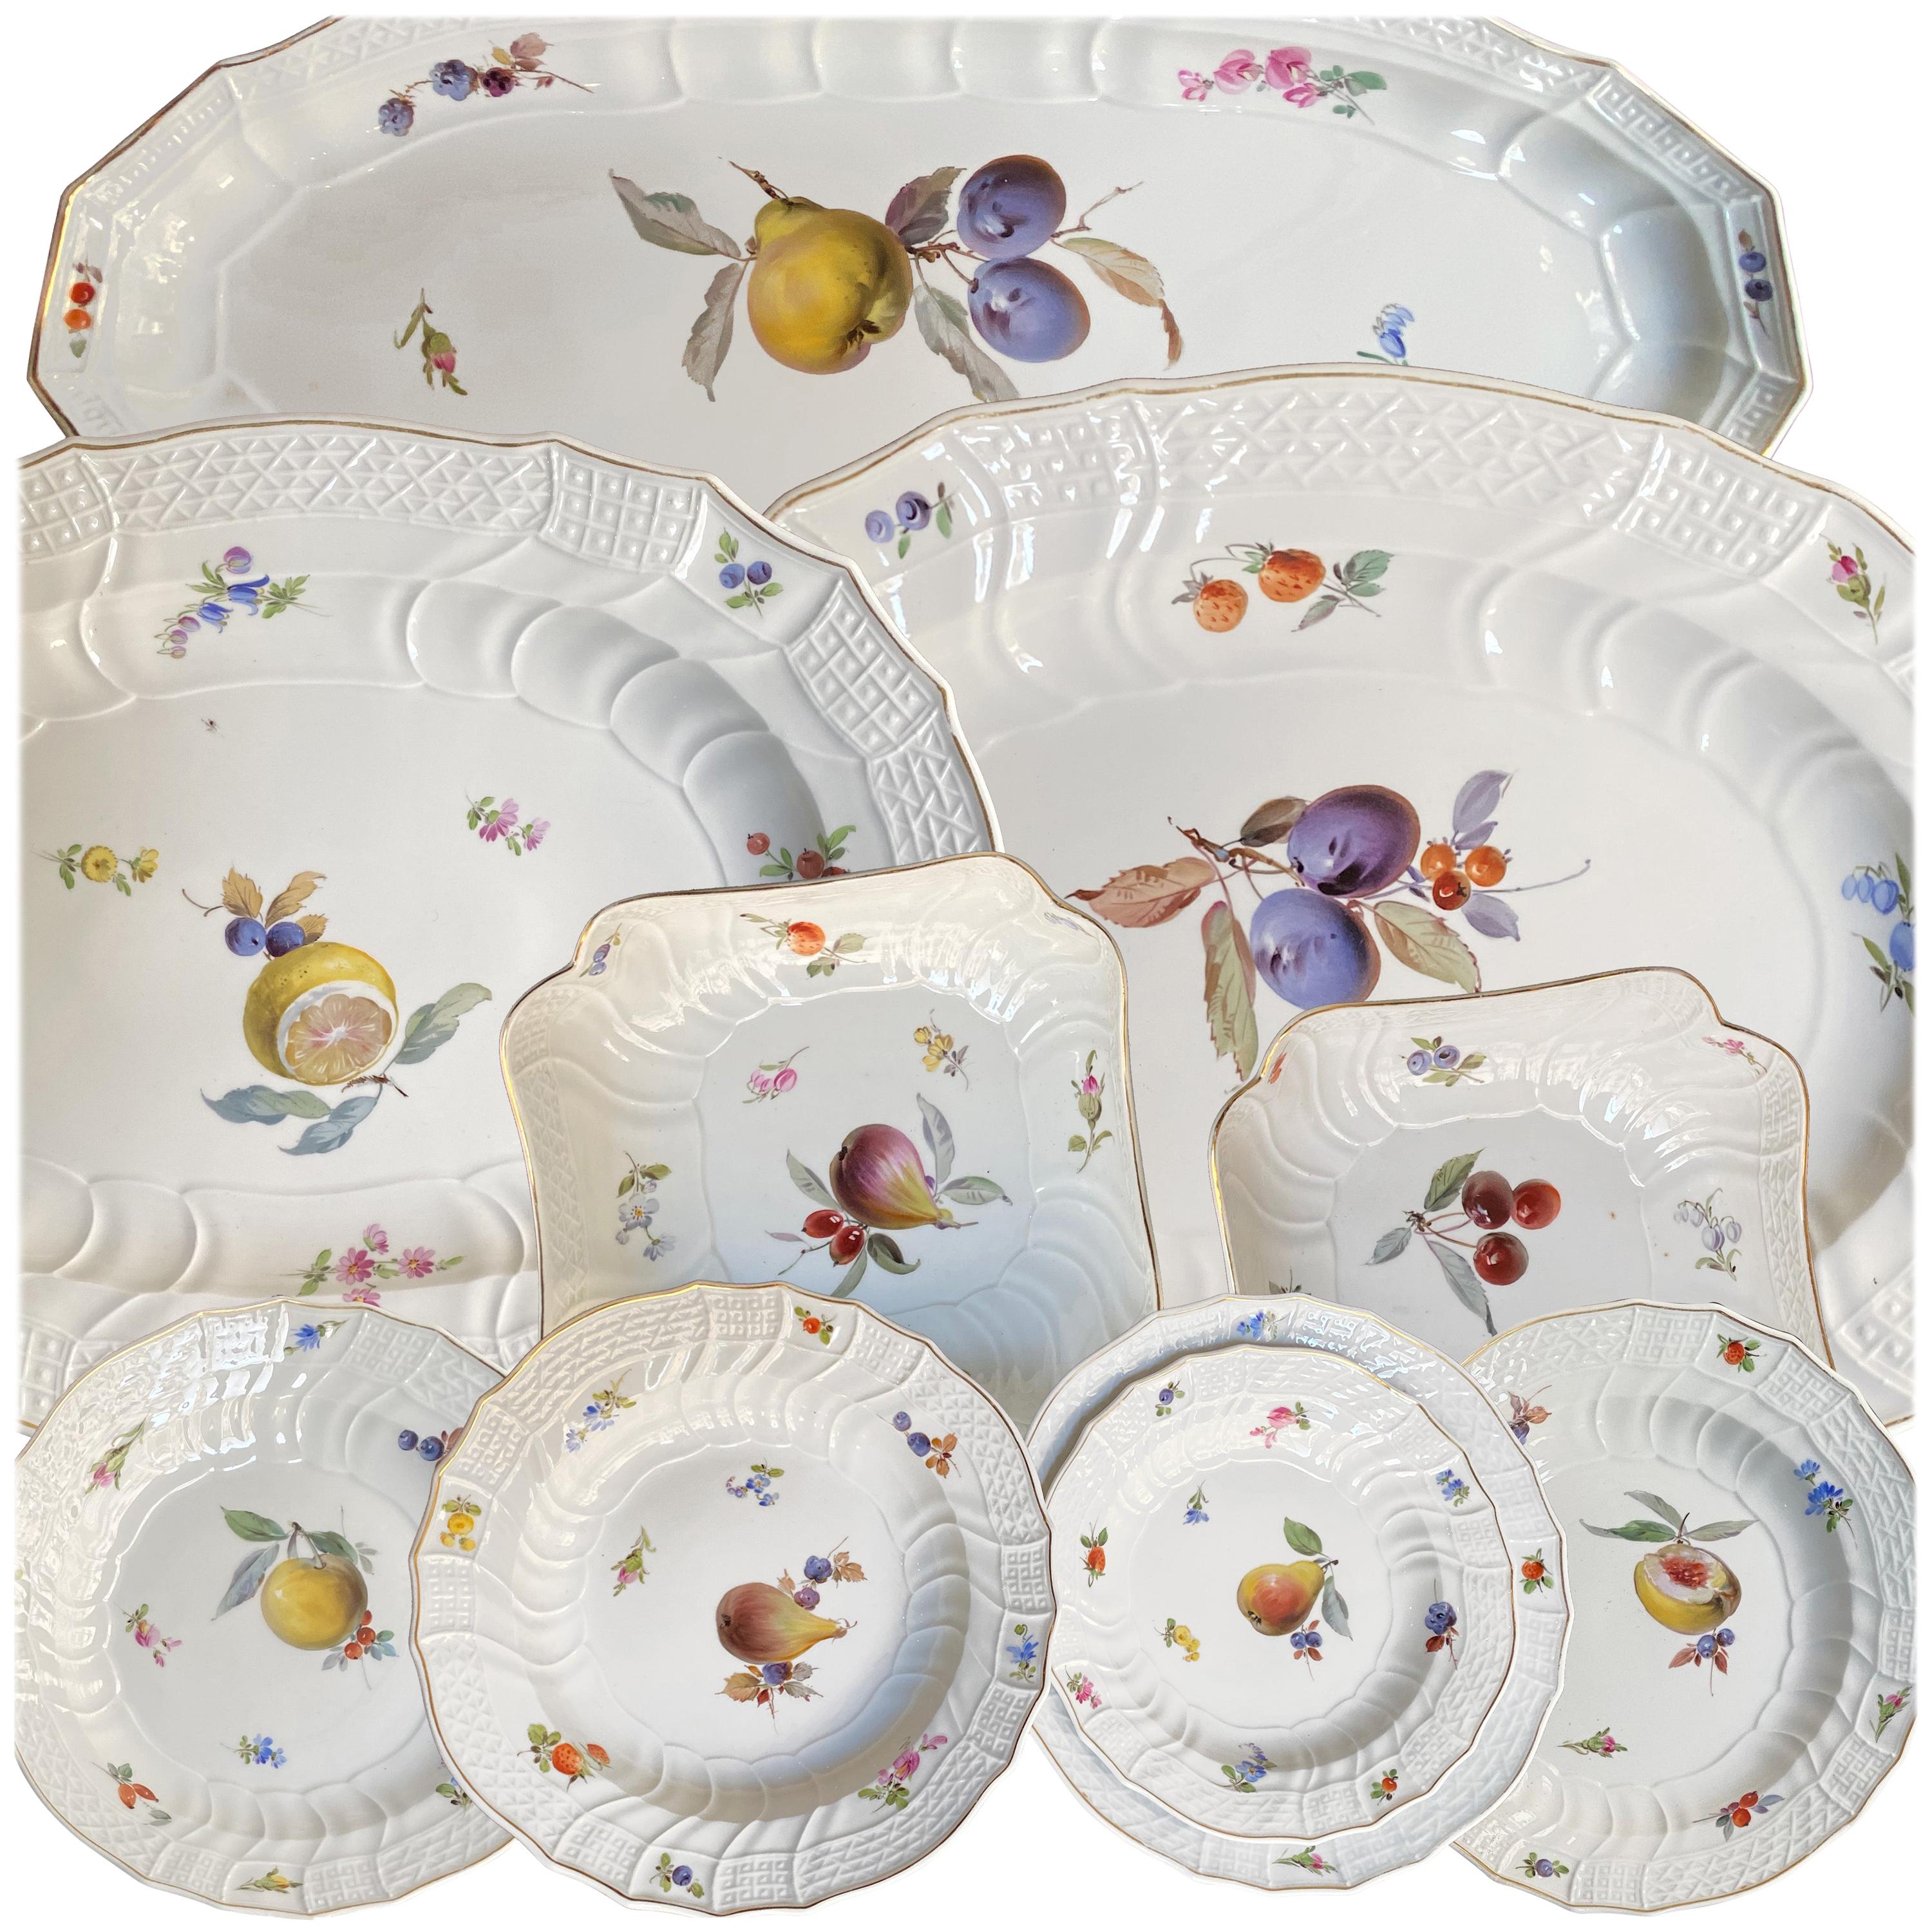 This Meissen hand painted exquisite service with fruits and flower seedlings is composed of 50 pieces. Typical 18th century style, delicate colors, exceptional work realized by Meissen, internationally recognized talented and high-quality